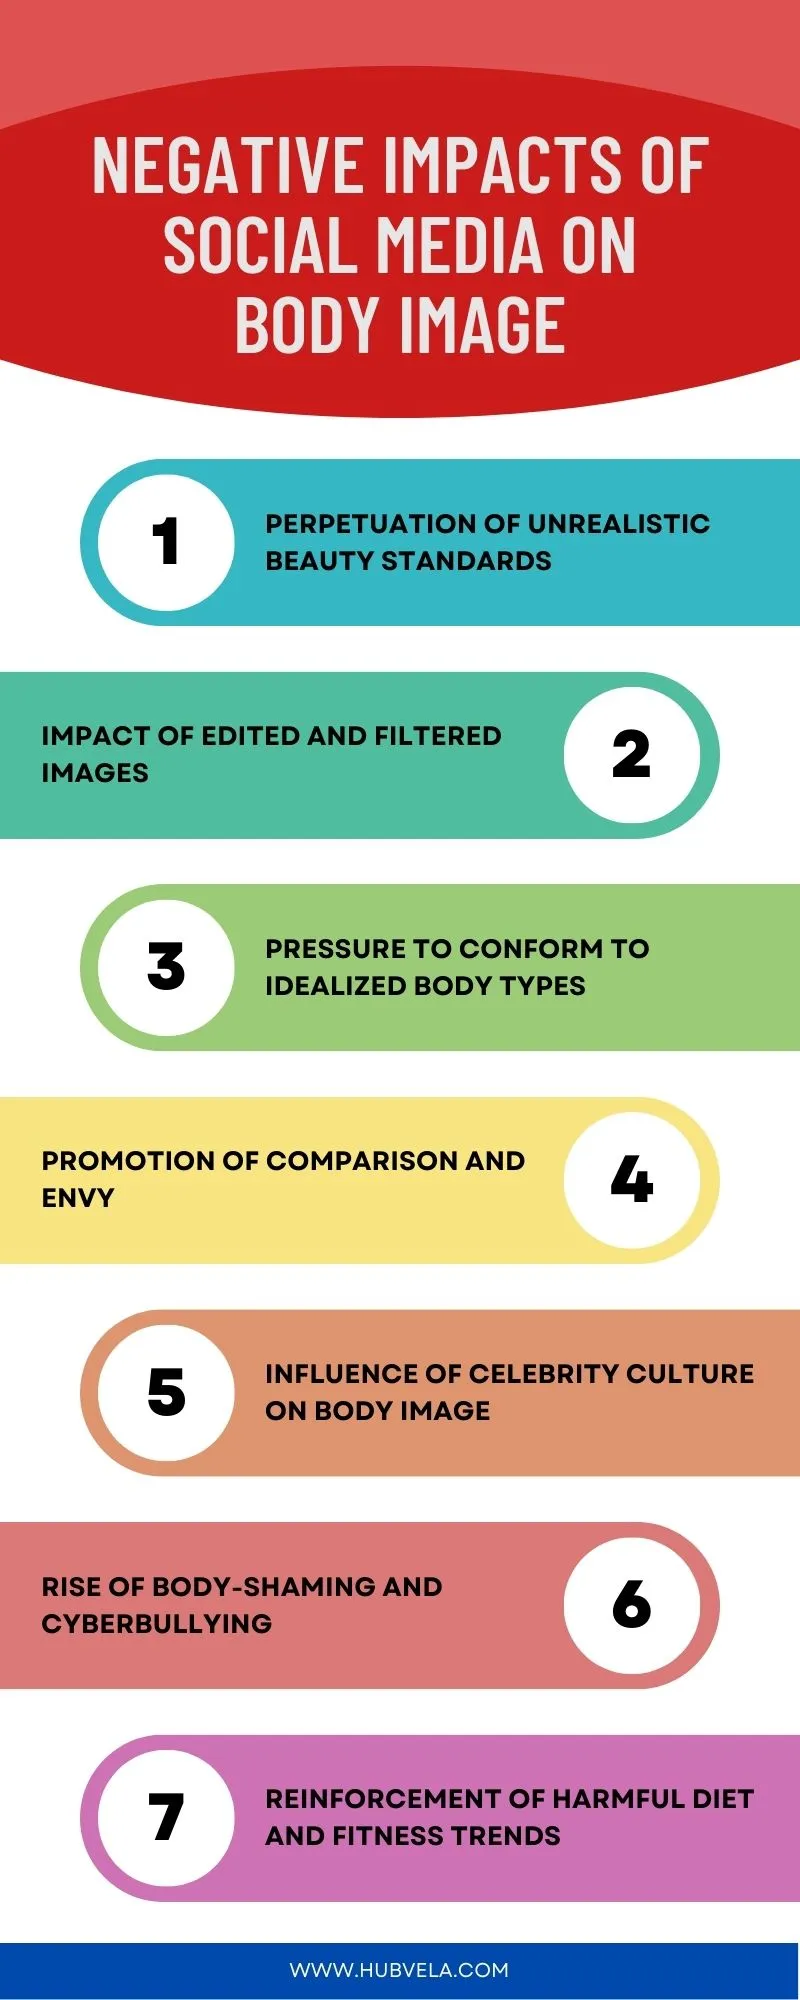 Negative Impacts of Social Media on Body Image Infographic